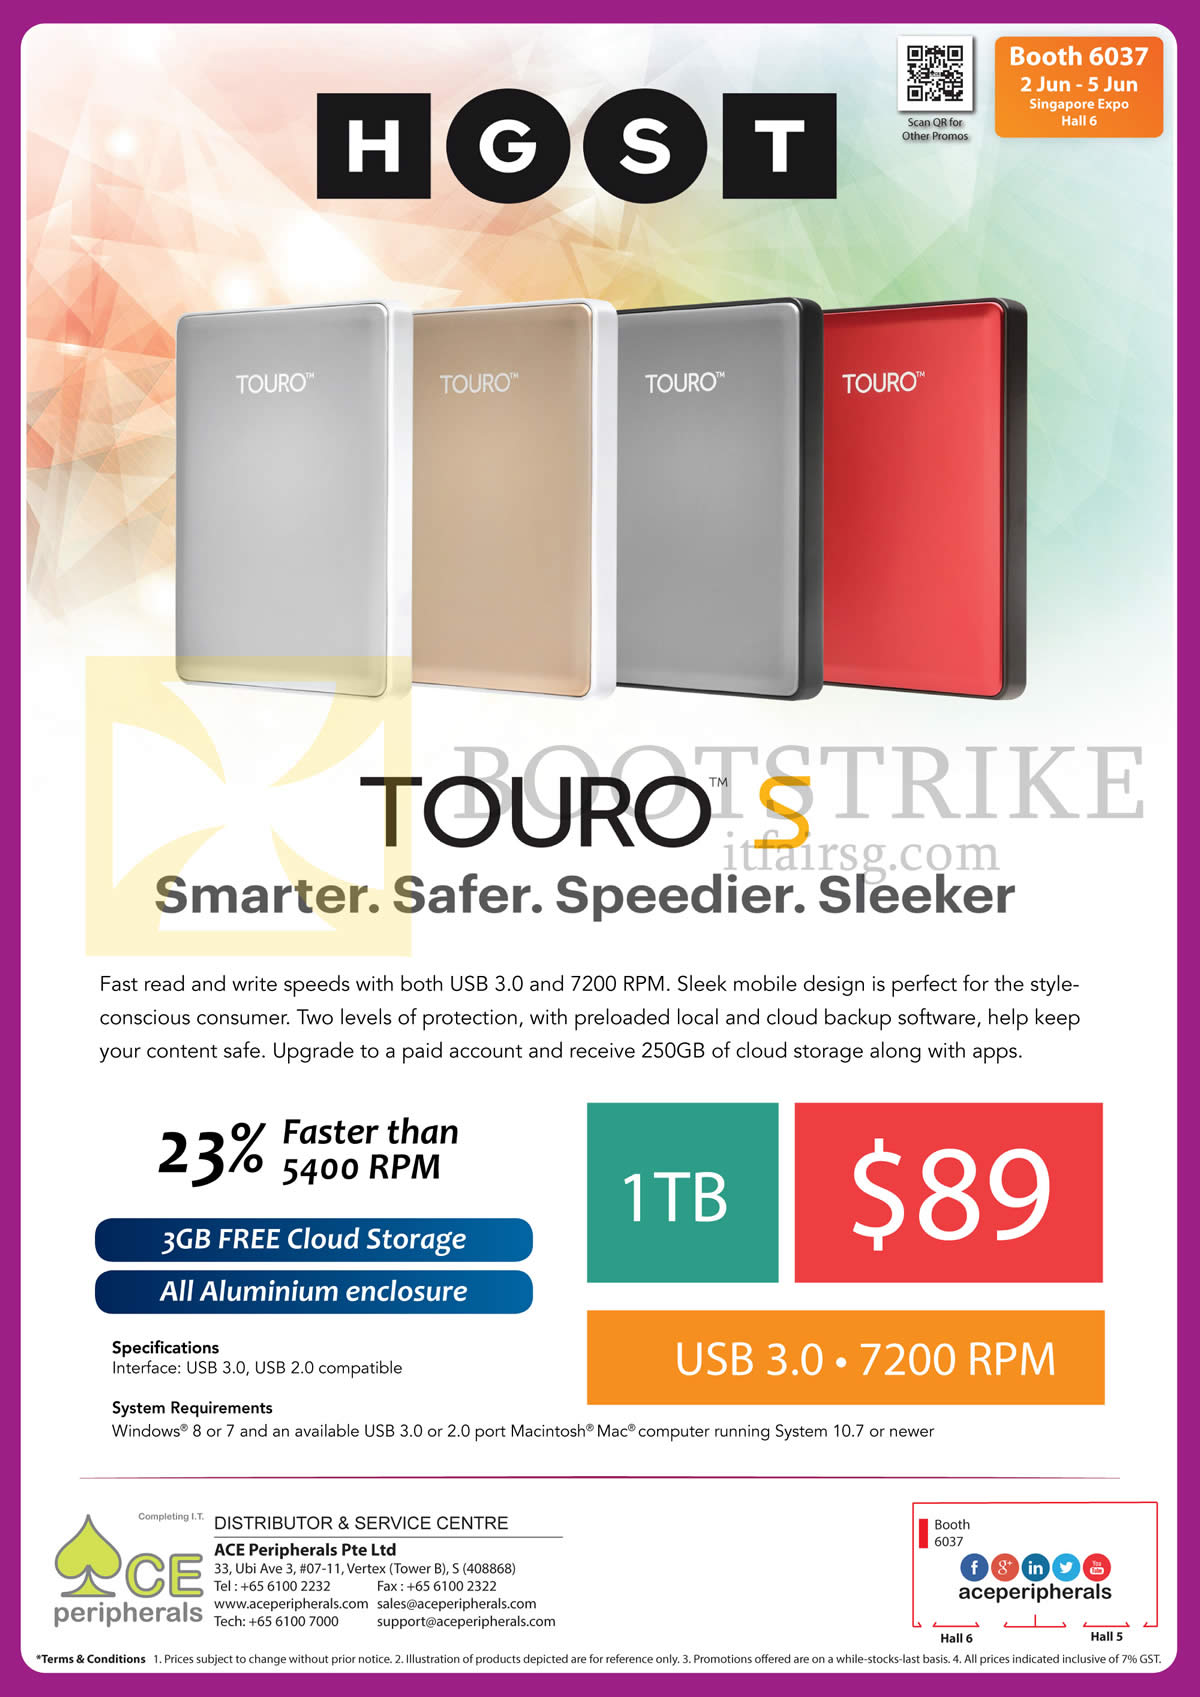 PC SHOW 2016 price list image brochure of Ace Peripherals HGST TOURO S Portable HDD TB